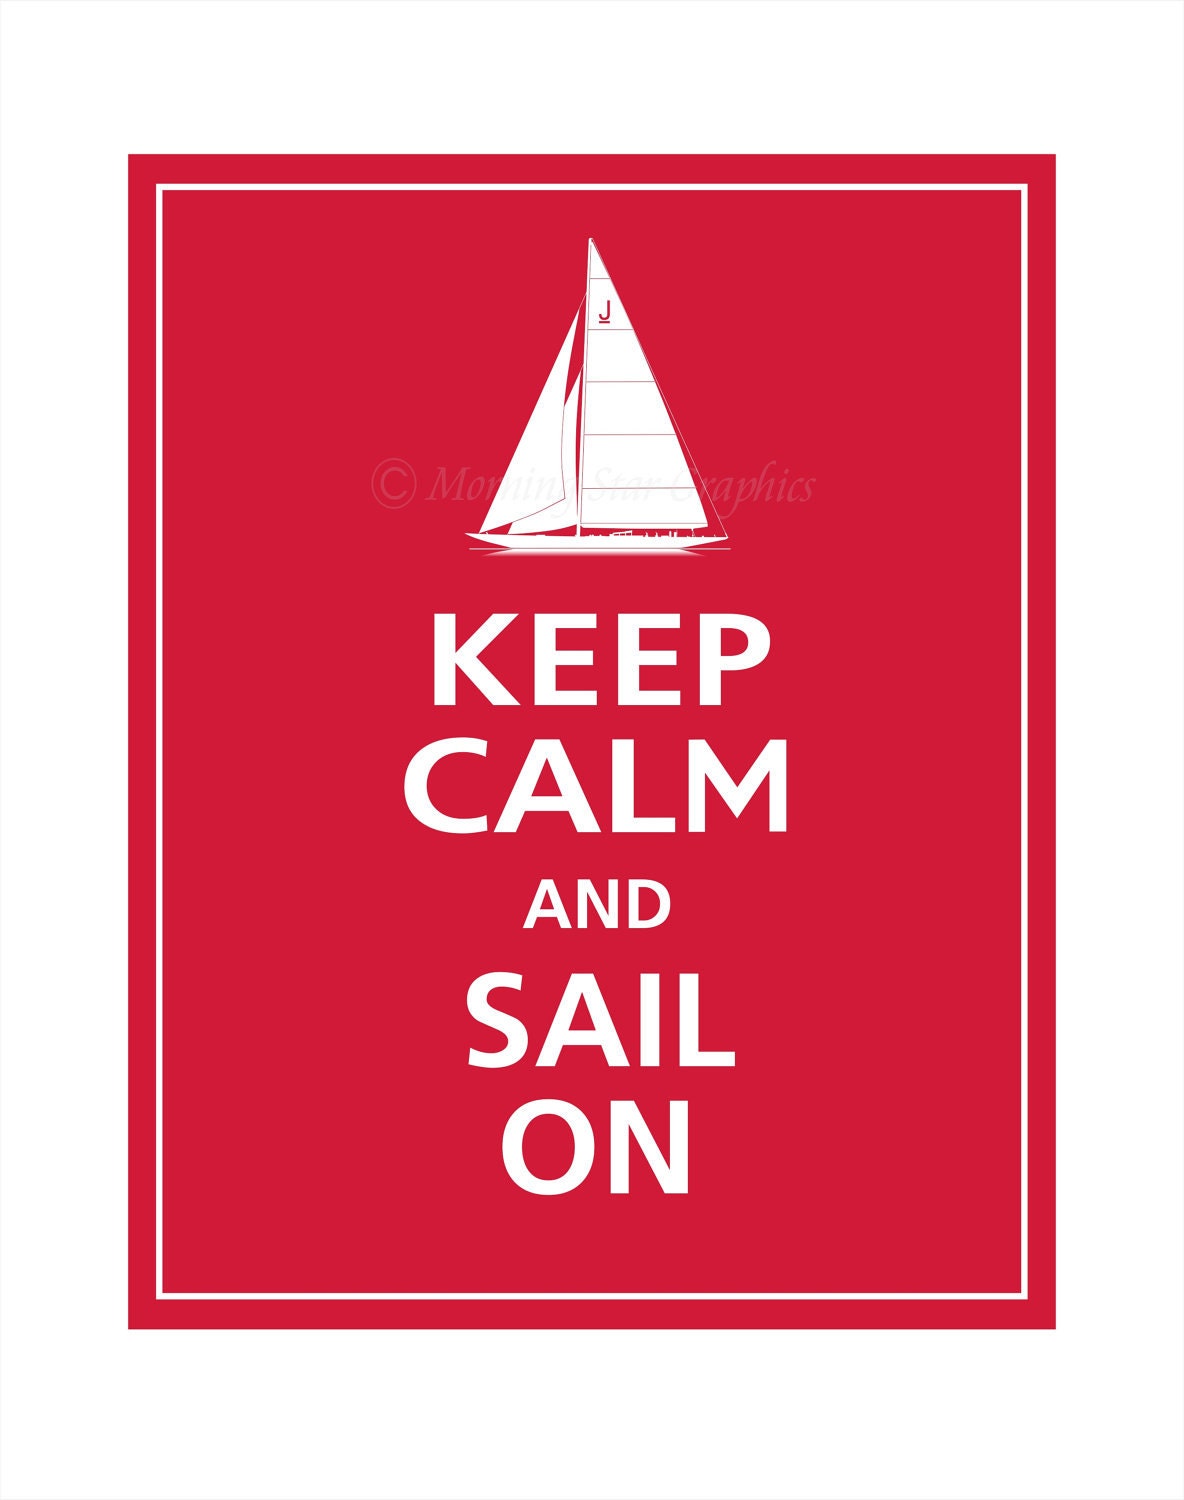 Keep Calm and SAIL ON (Vintage J Boat) Poster 11x14 (Vintage Red featured -- 56 colors to choose from) - PosterPop